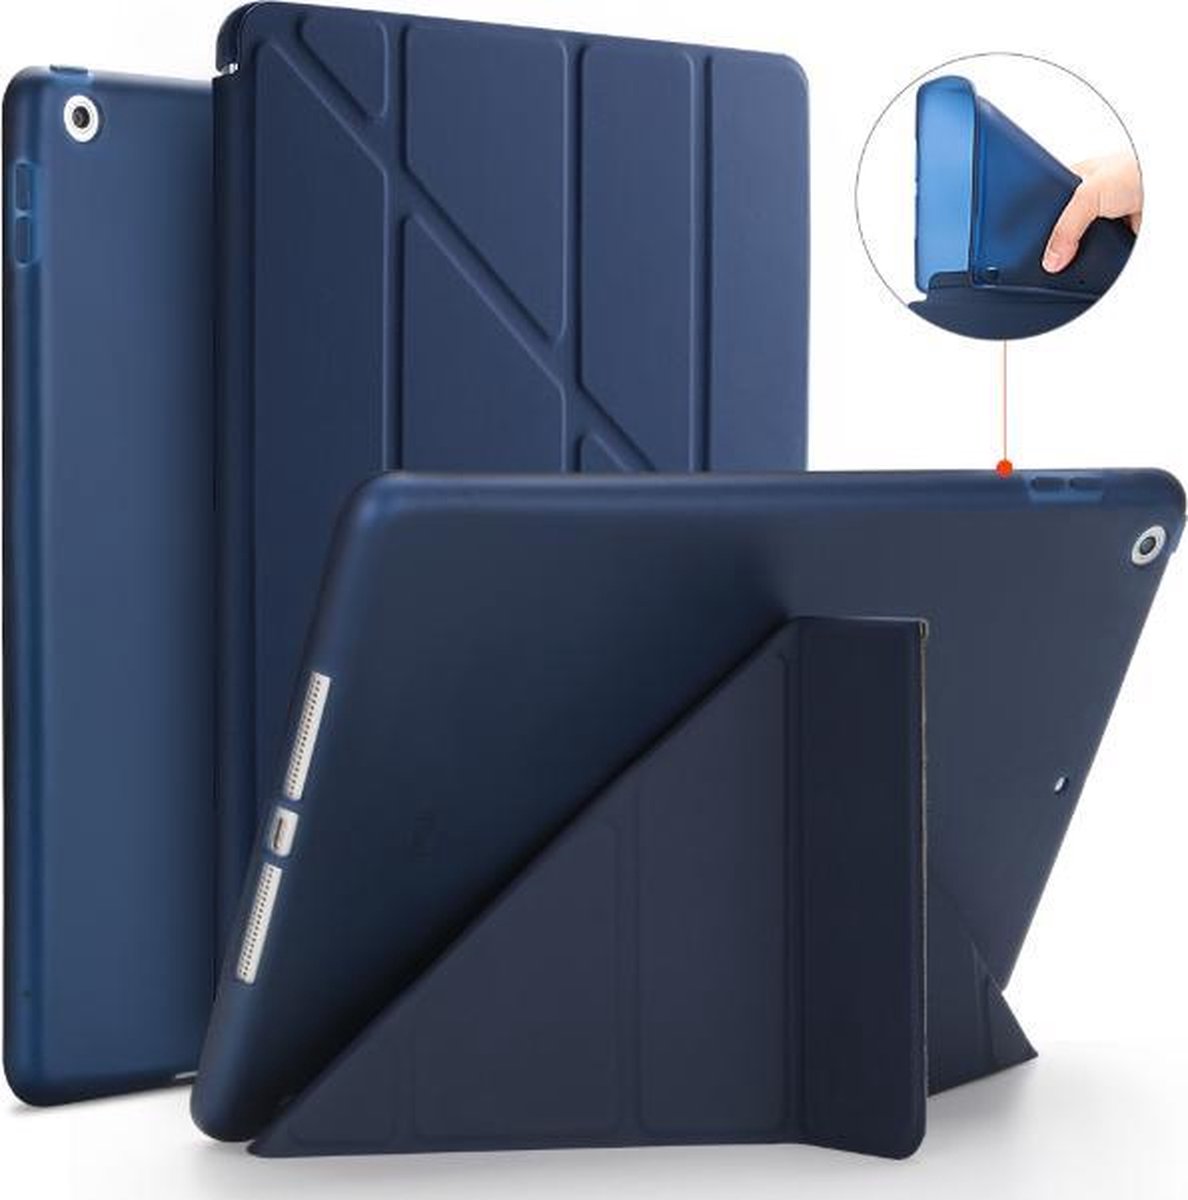 SBVR - Apple iPad Hoes 2017 - 10.5 inch - iPad Pro (2017) - Smart Cover - A1701, A1709, A1852 - Donkerblauw